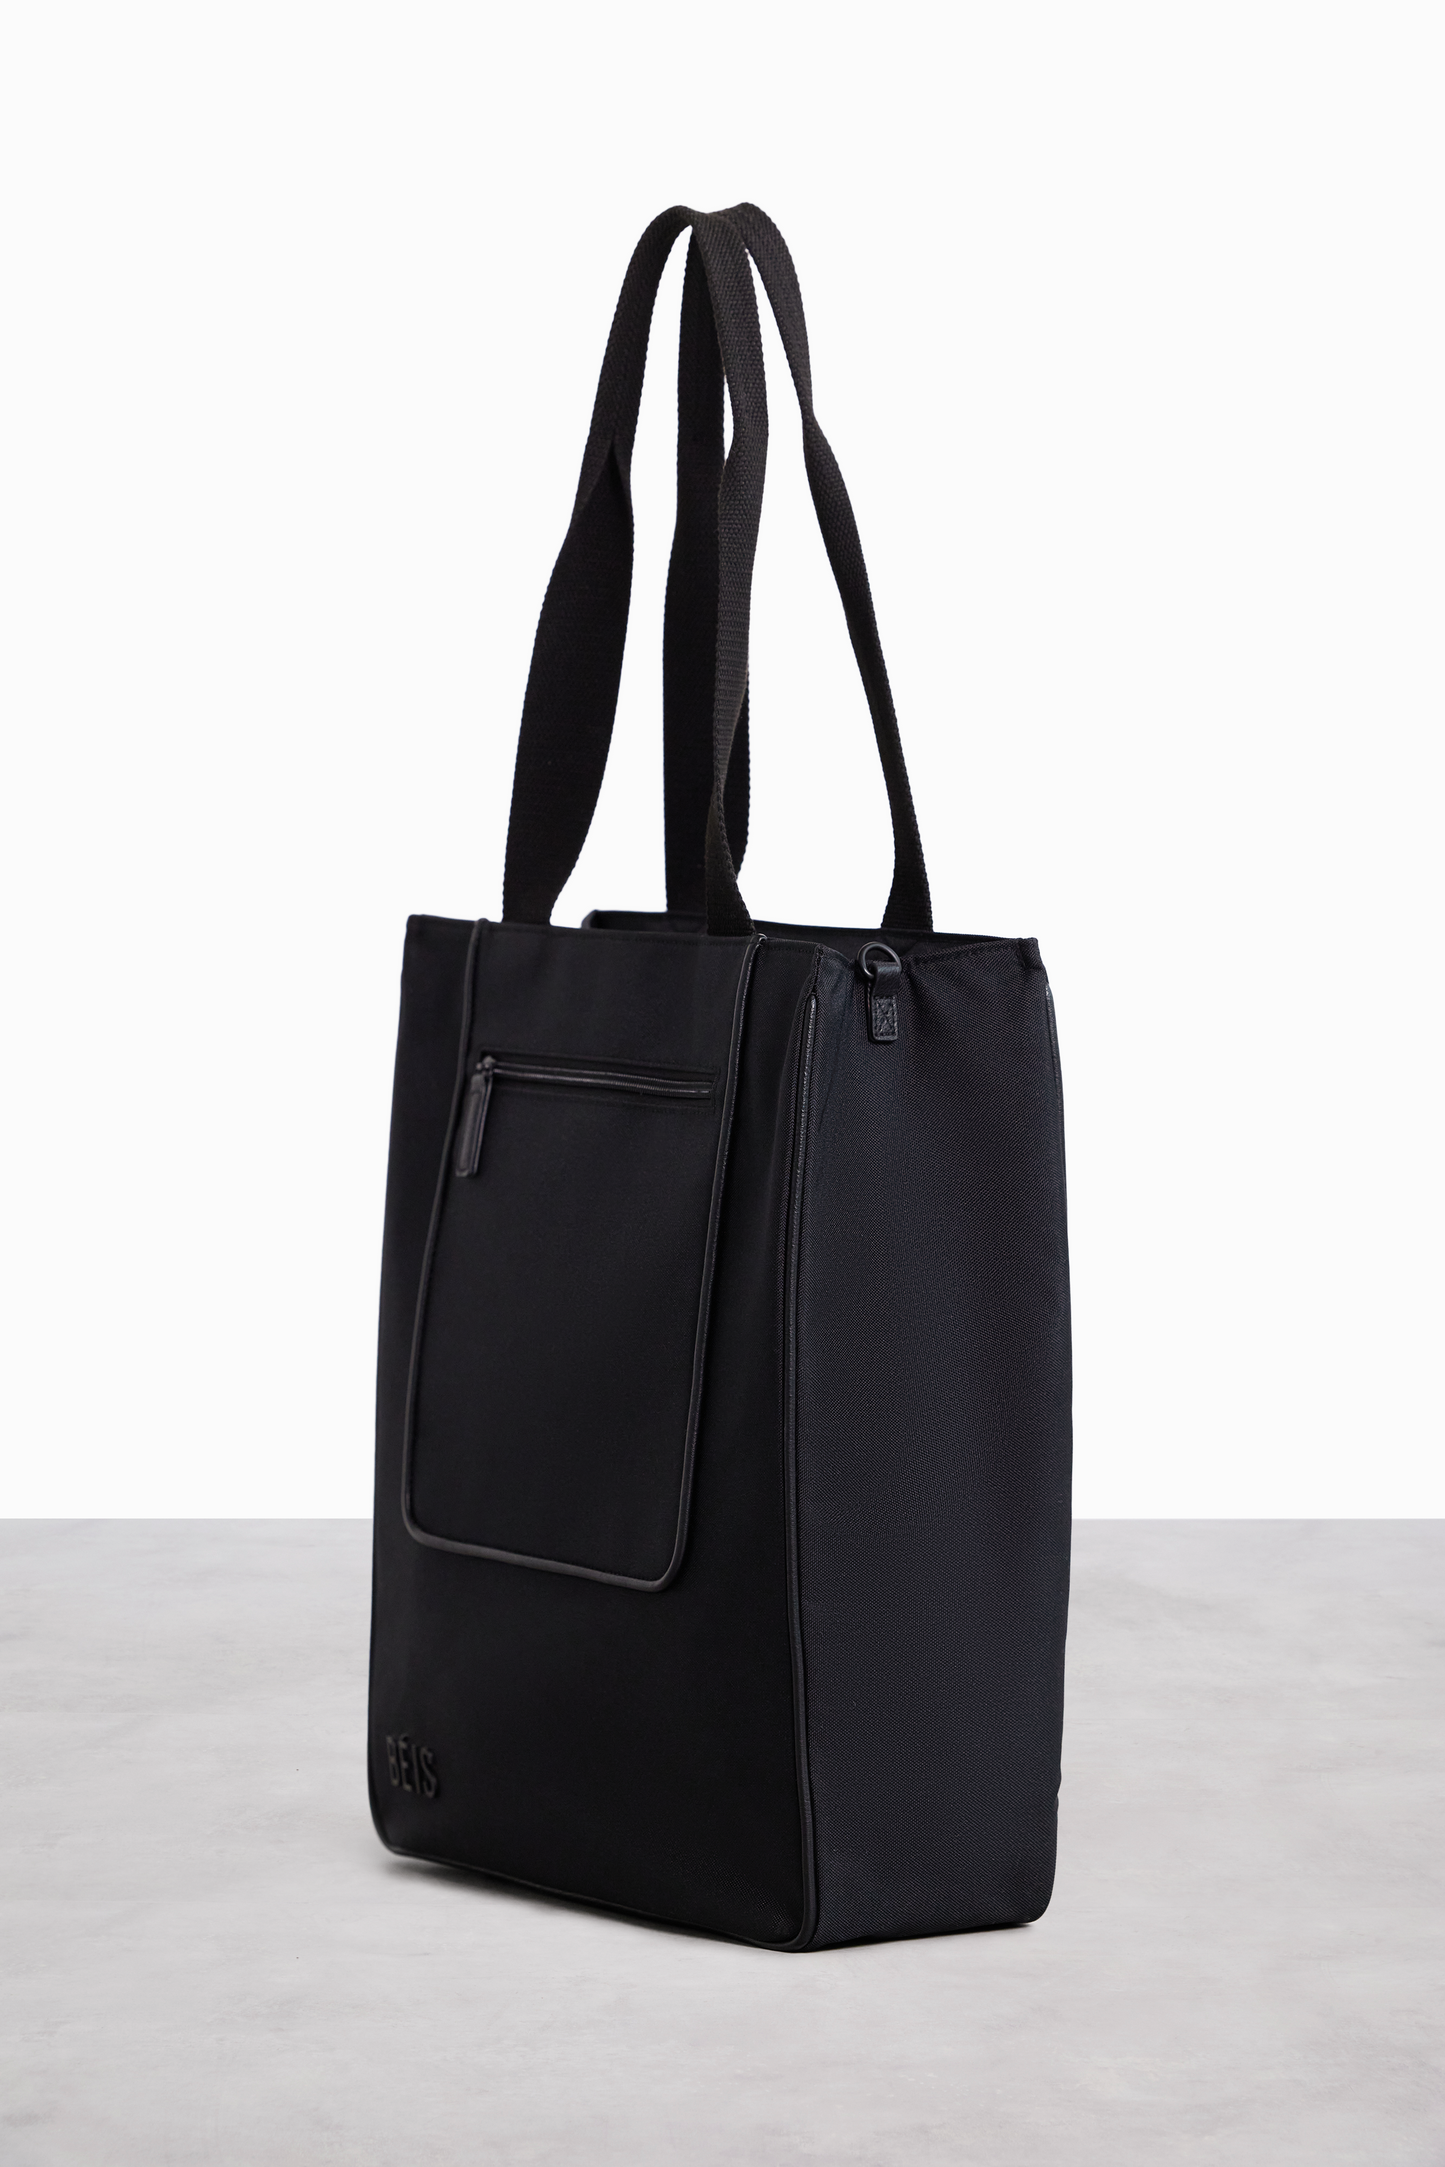 The North To South Tote in Black